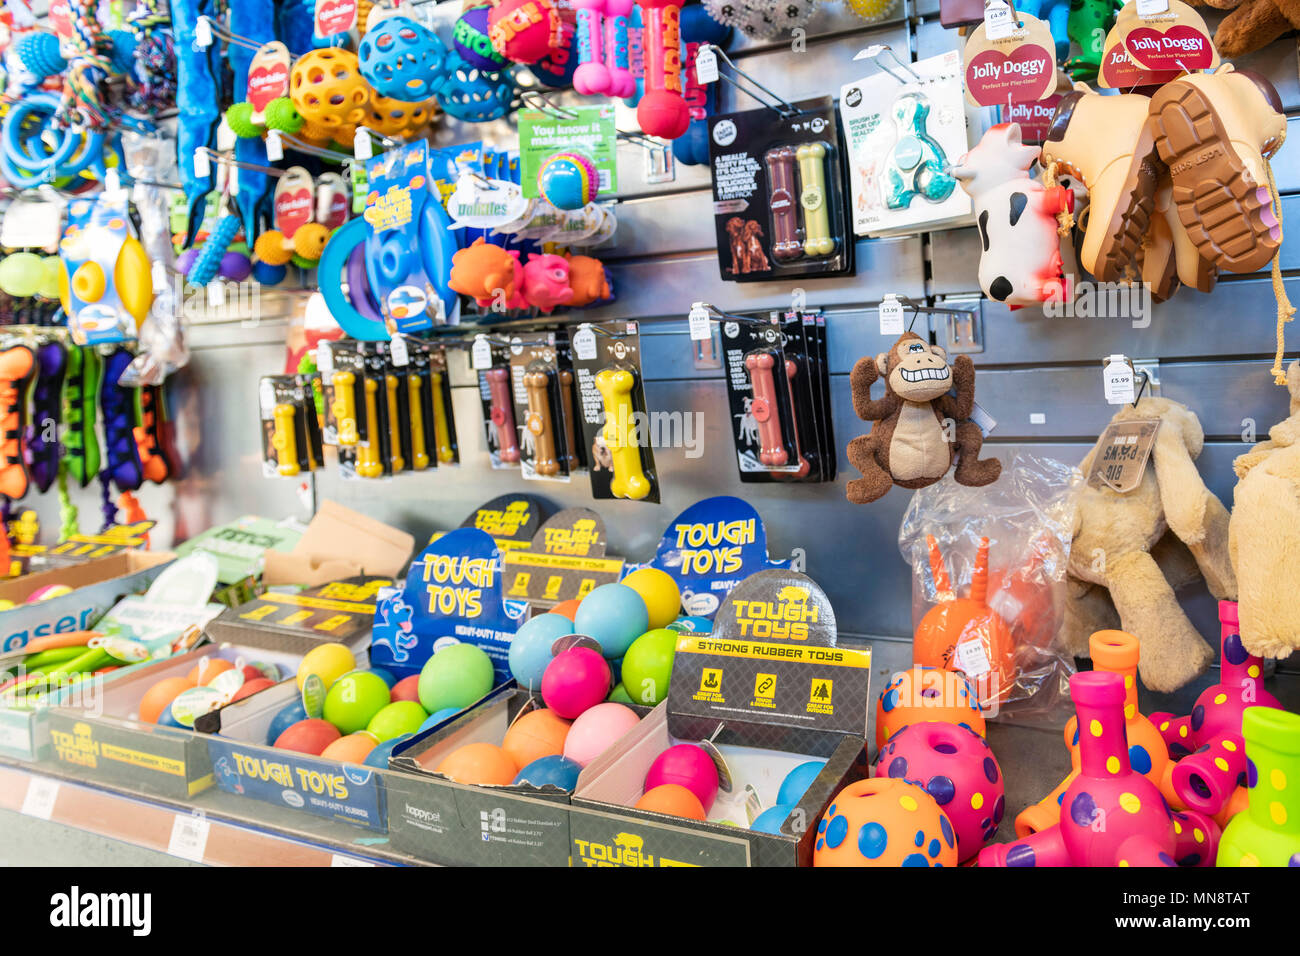 Dog toys for sale in a store, UK Stock 